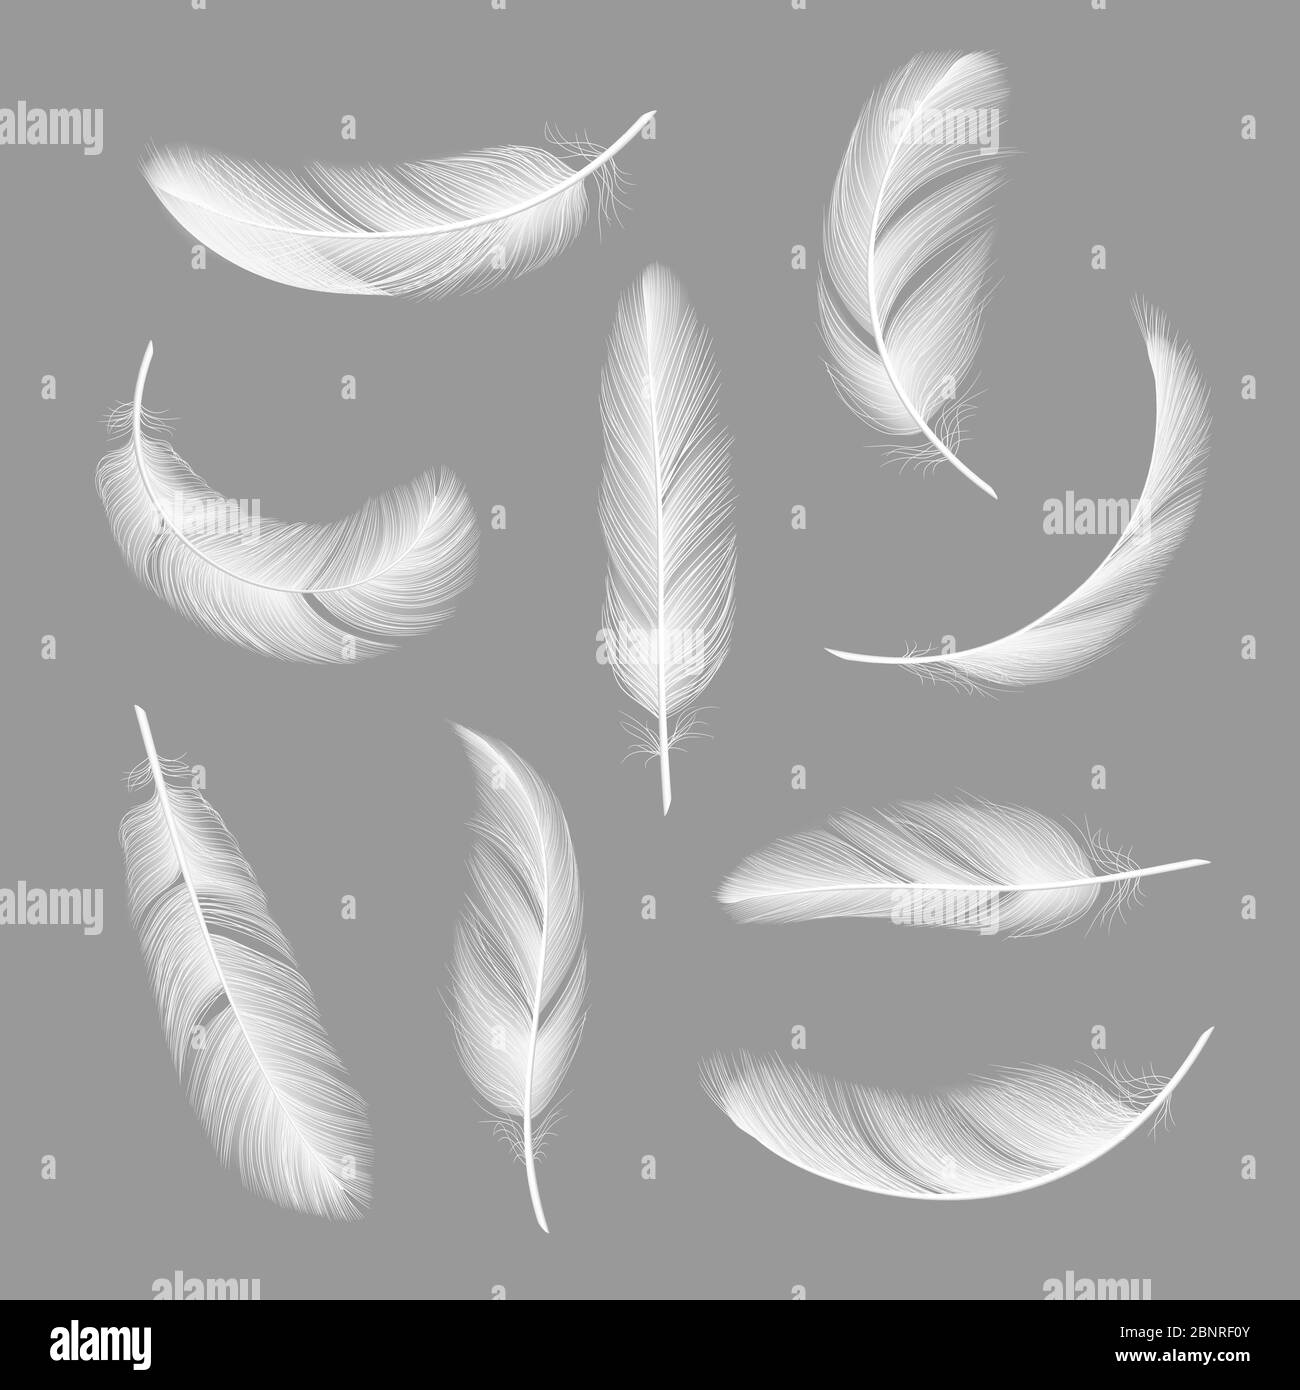 Feathers realistic. Flying furry weightless white swan objects vector isolated on dark background Stock Vector